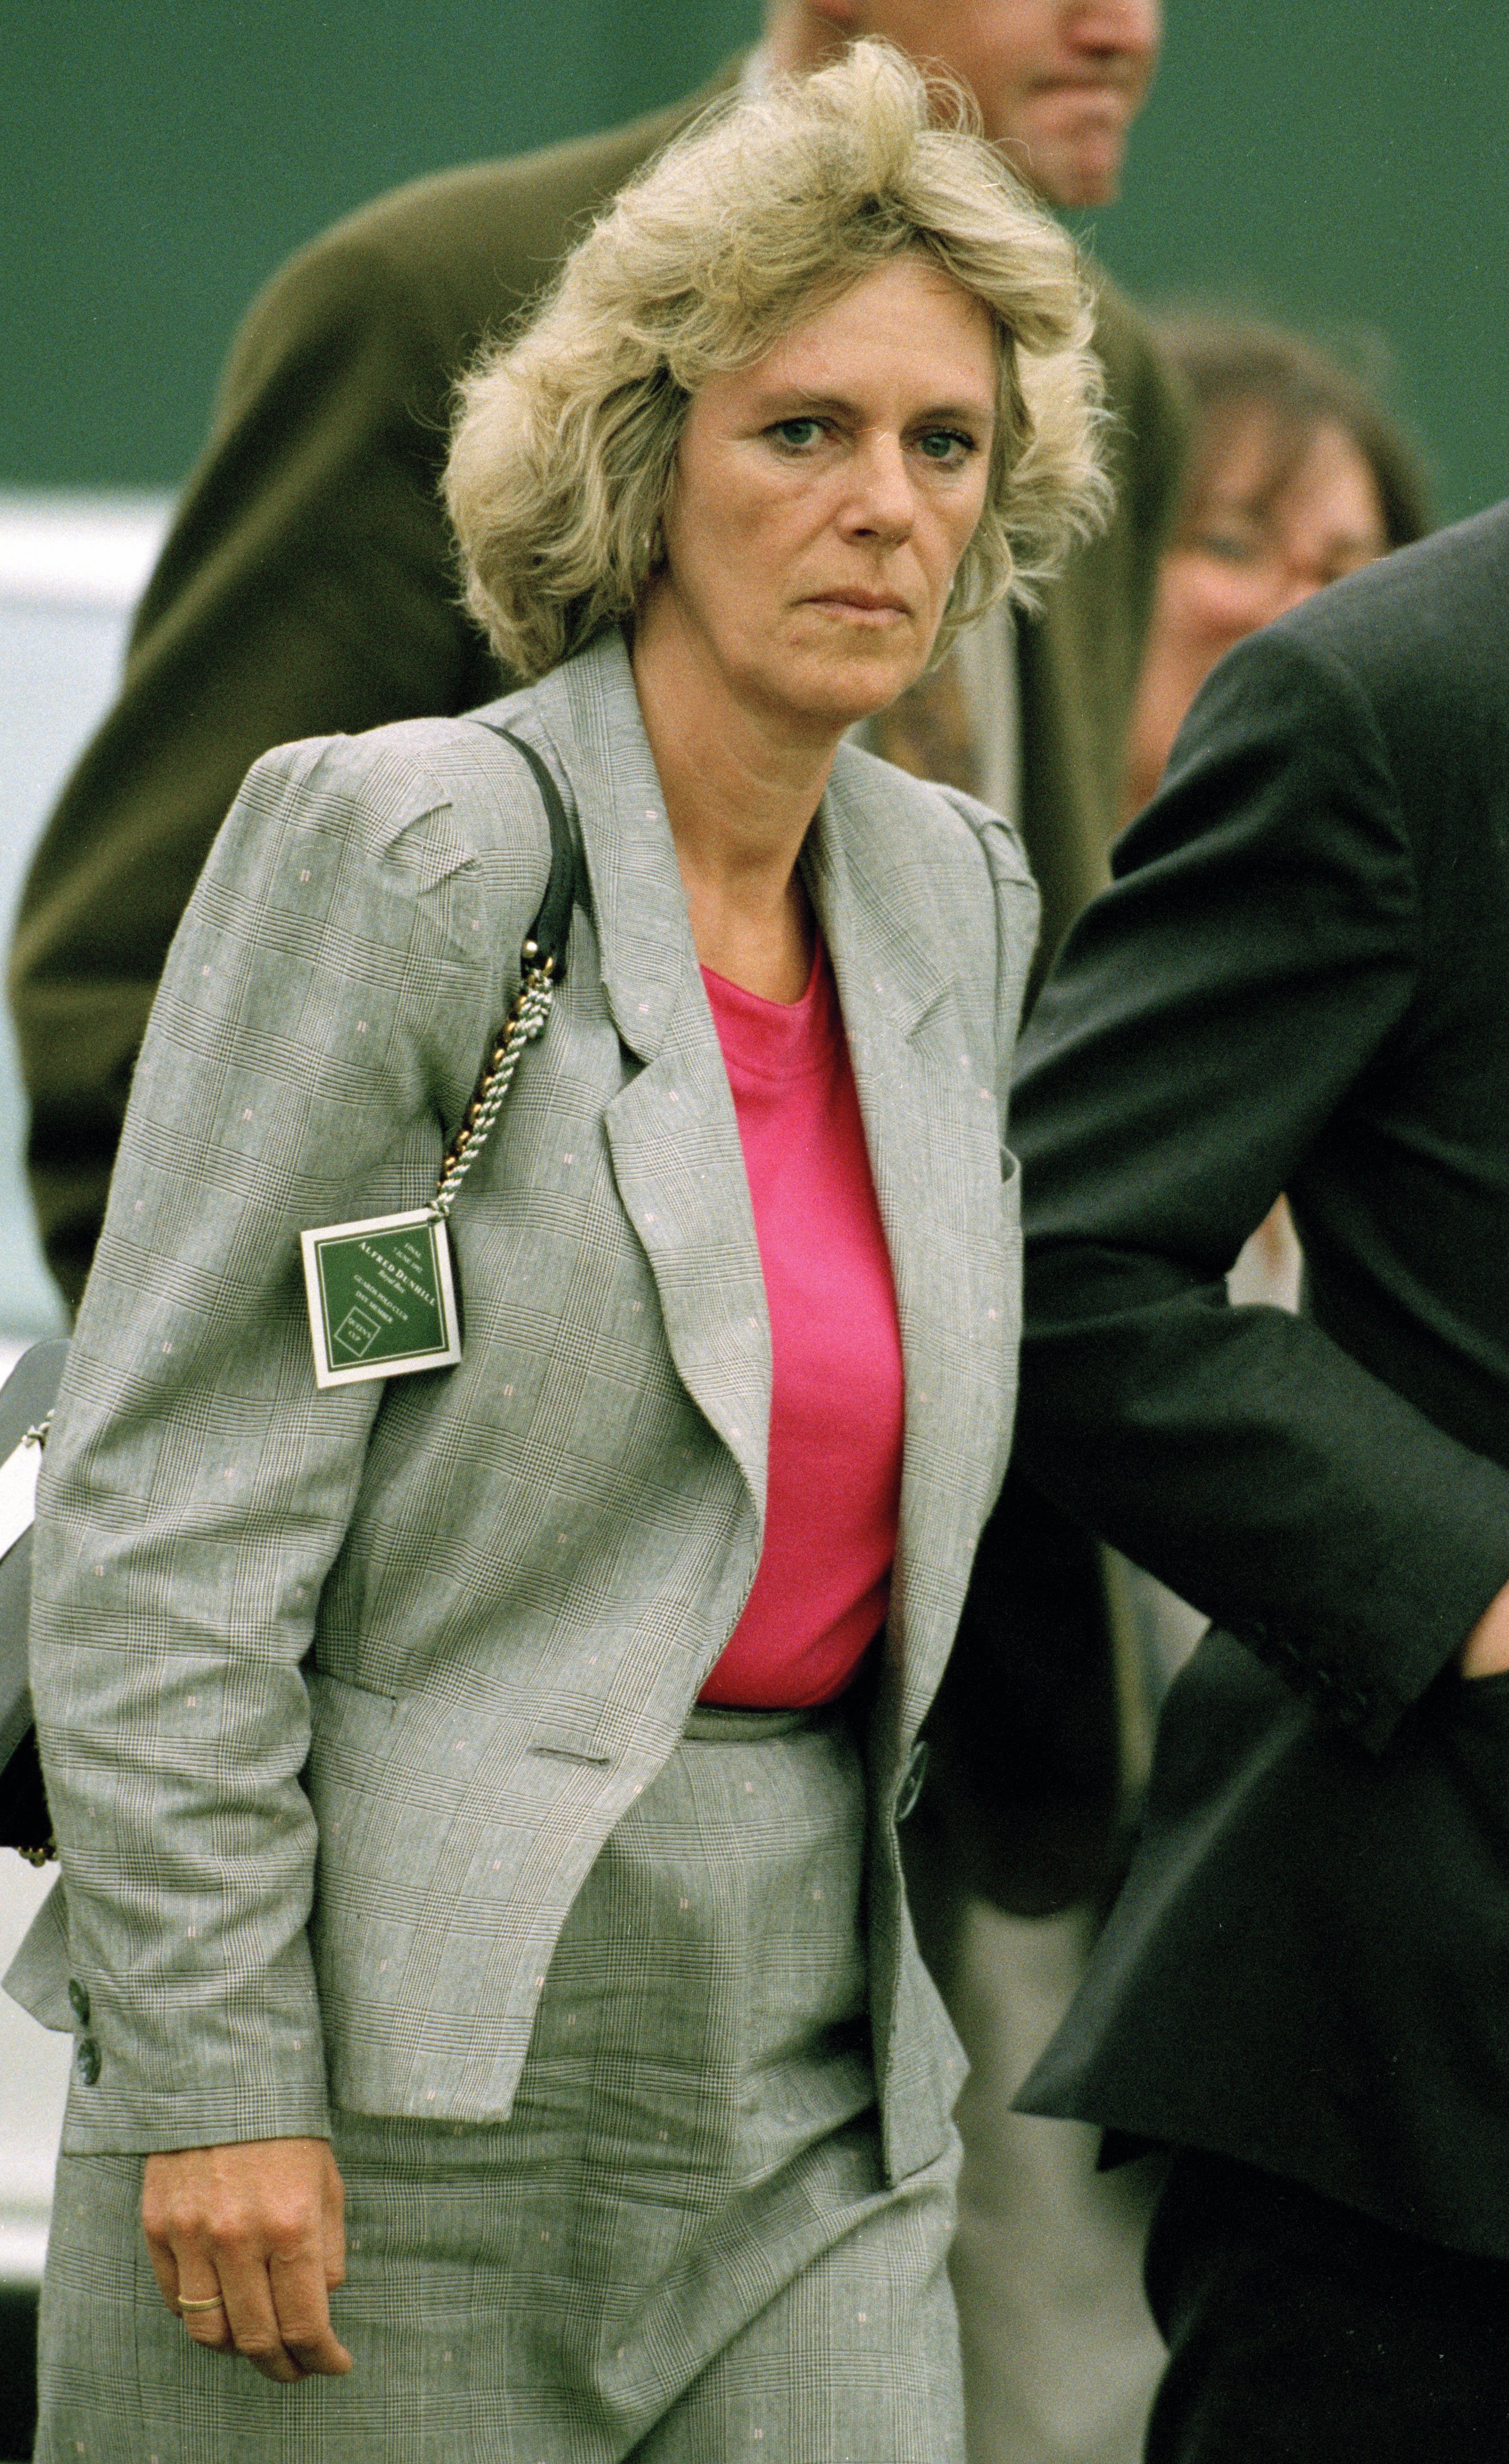 The Queen Consort Camilla photographed in London in 1992. |  Source: Getty Images 